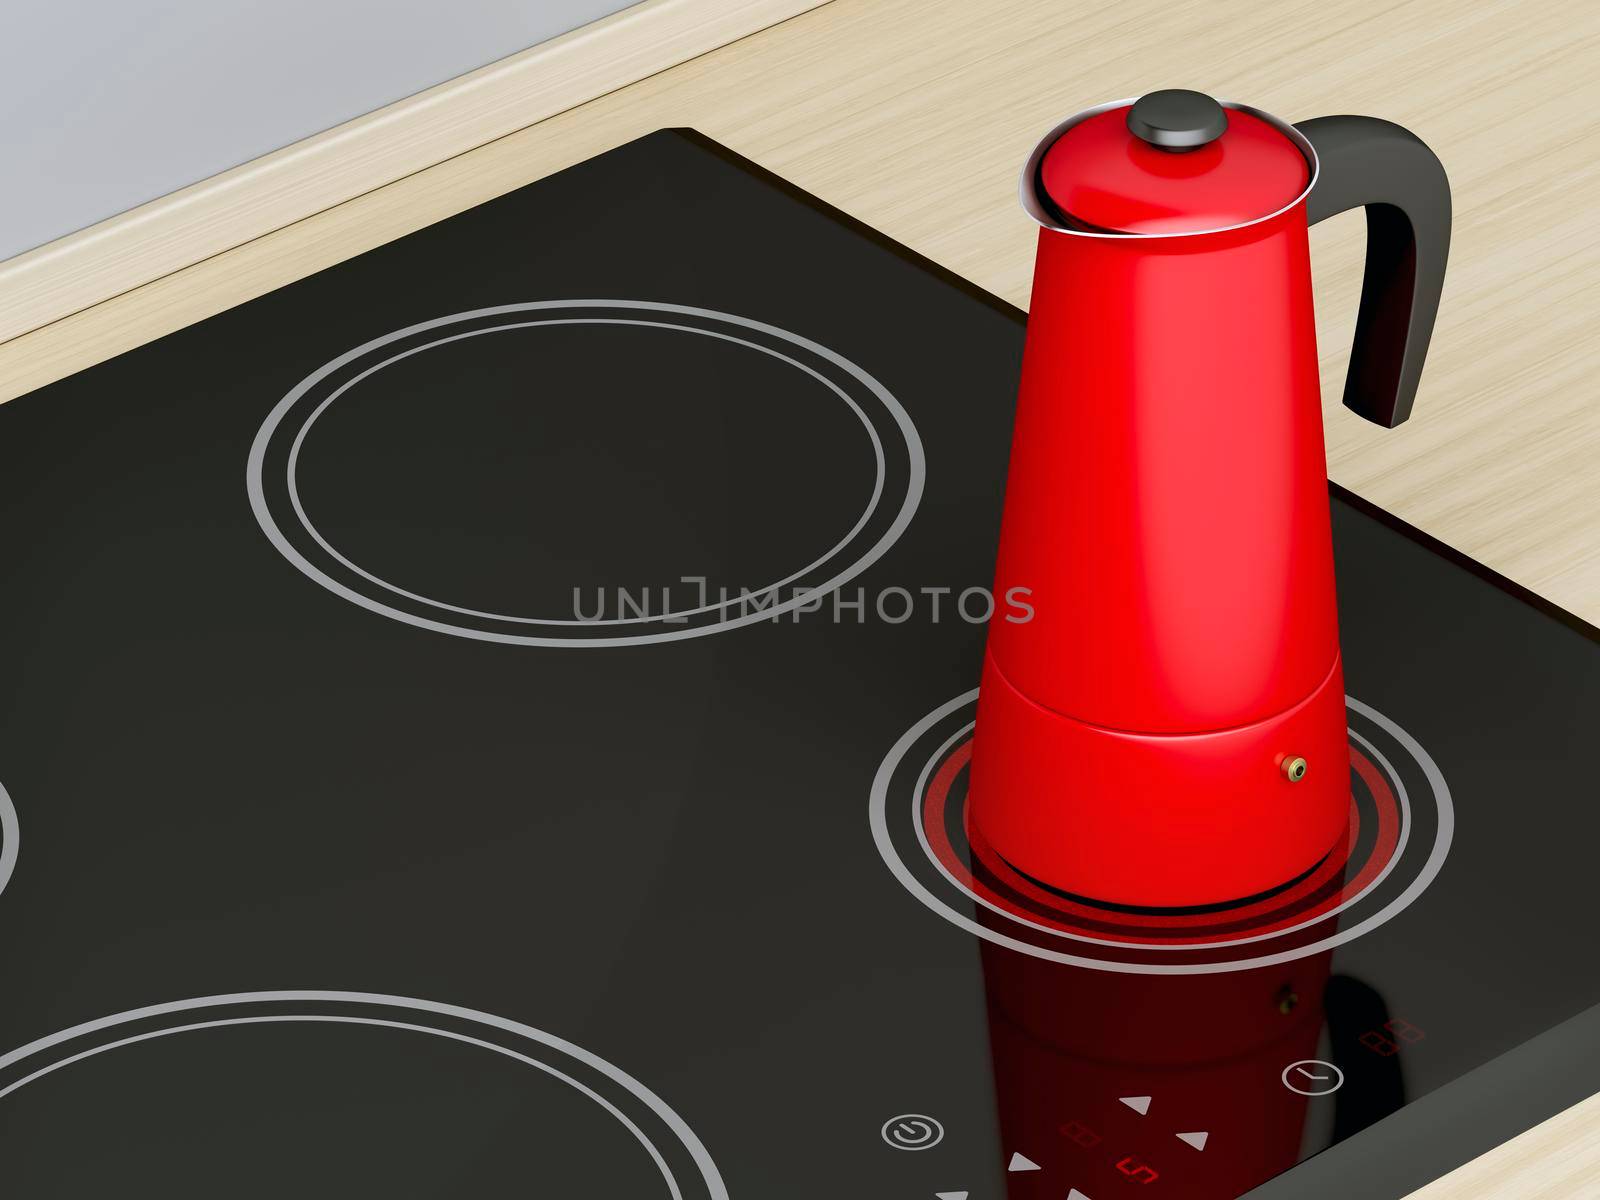 Moka pot on ceramic cooktop by magraphics